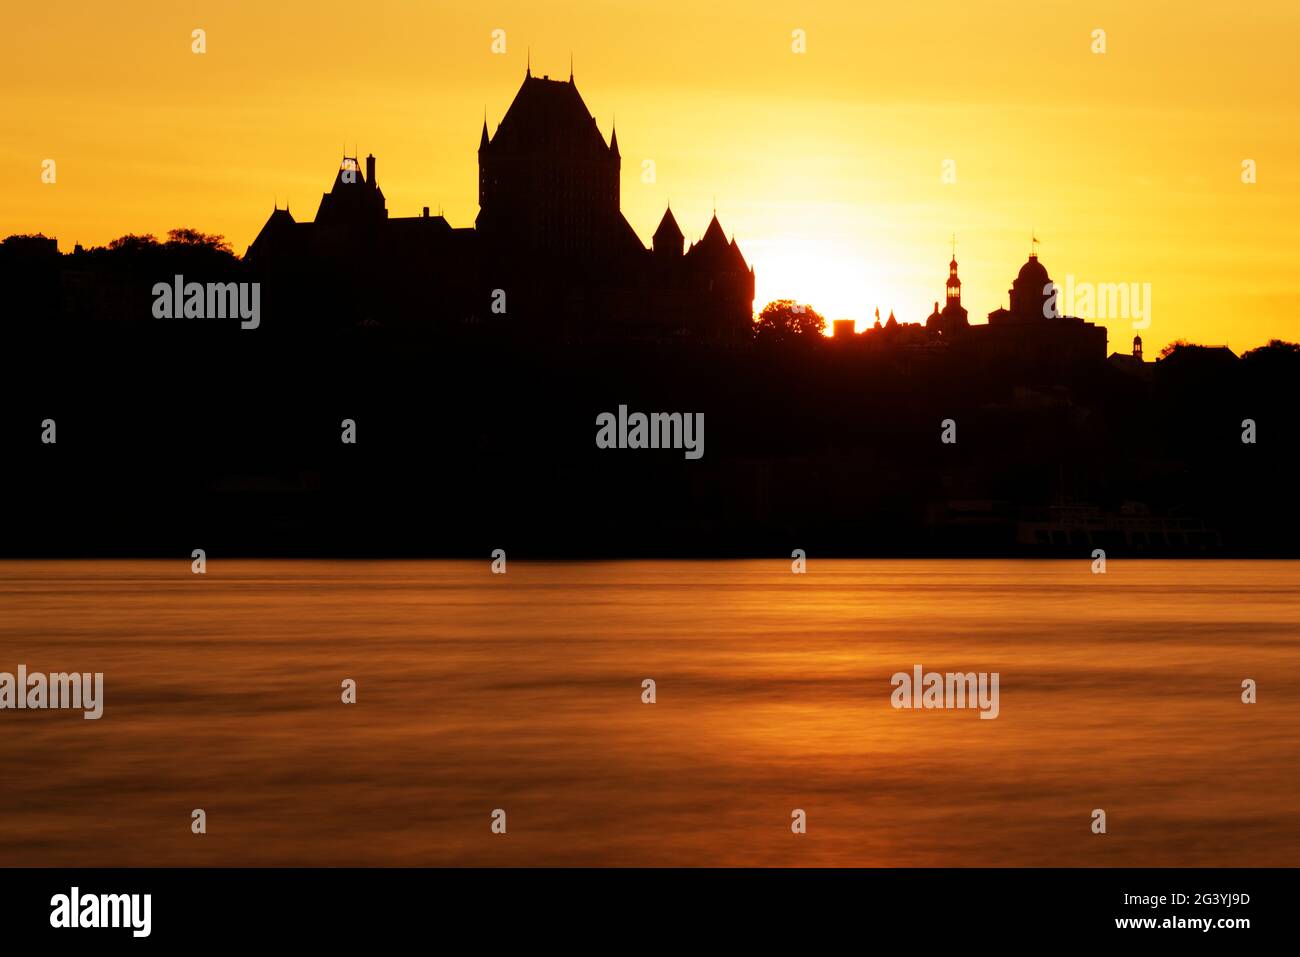 The Chateau Frontenac silhouetted against a dramatic sunset, as seen from Lévis, Quebec, Canada Stock Photo